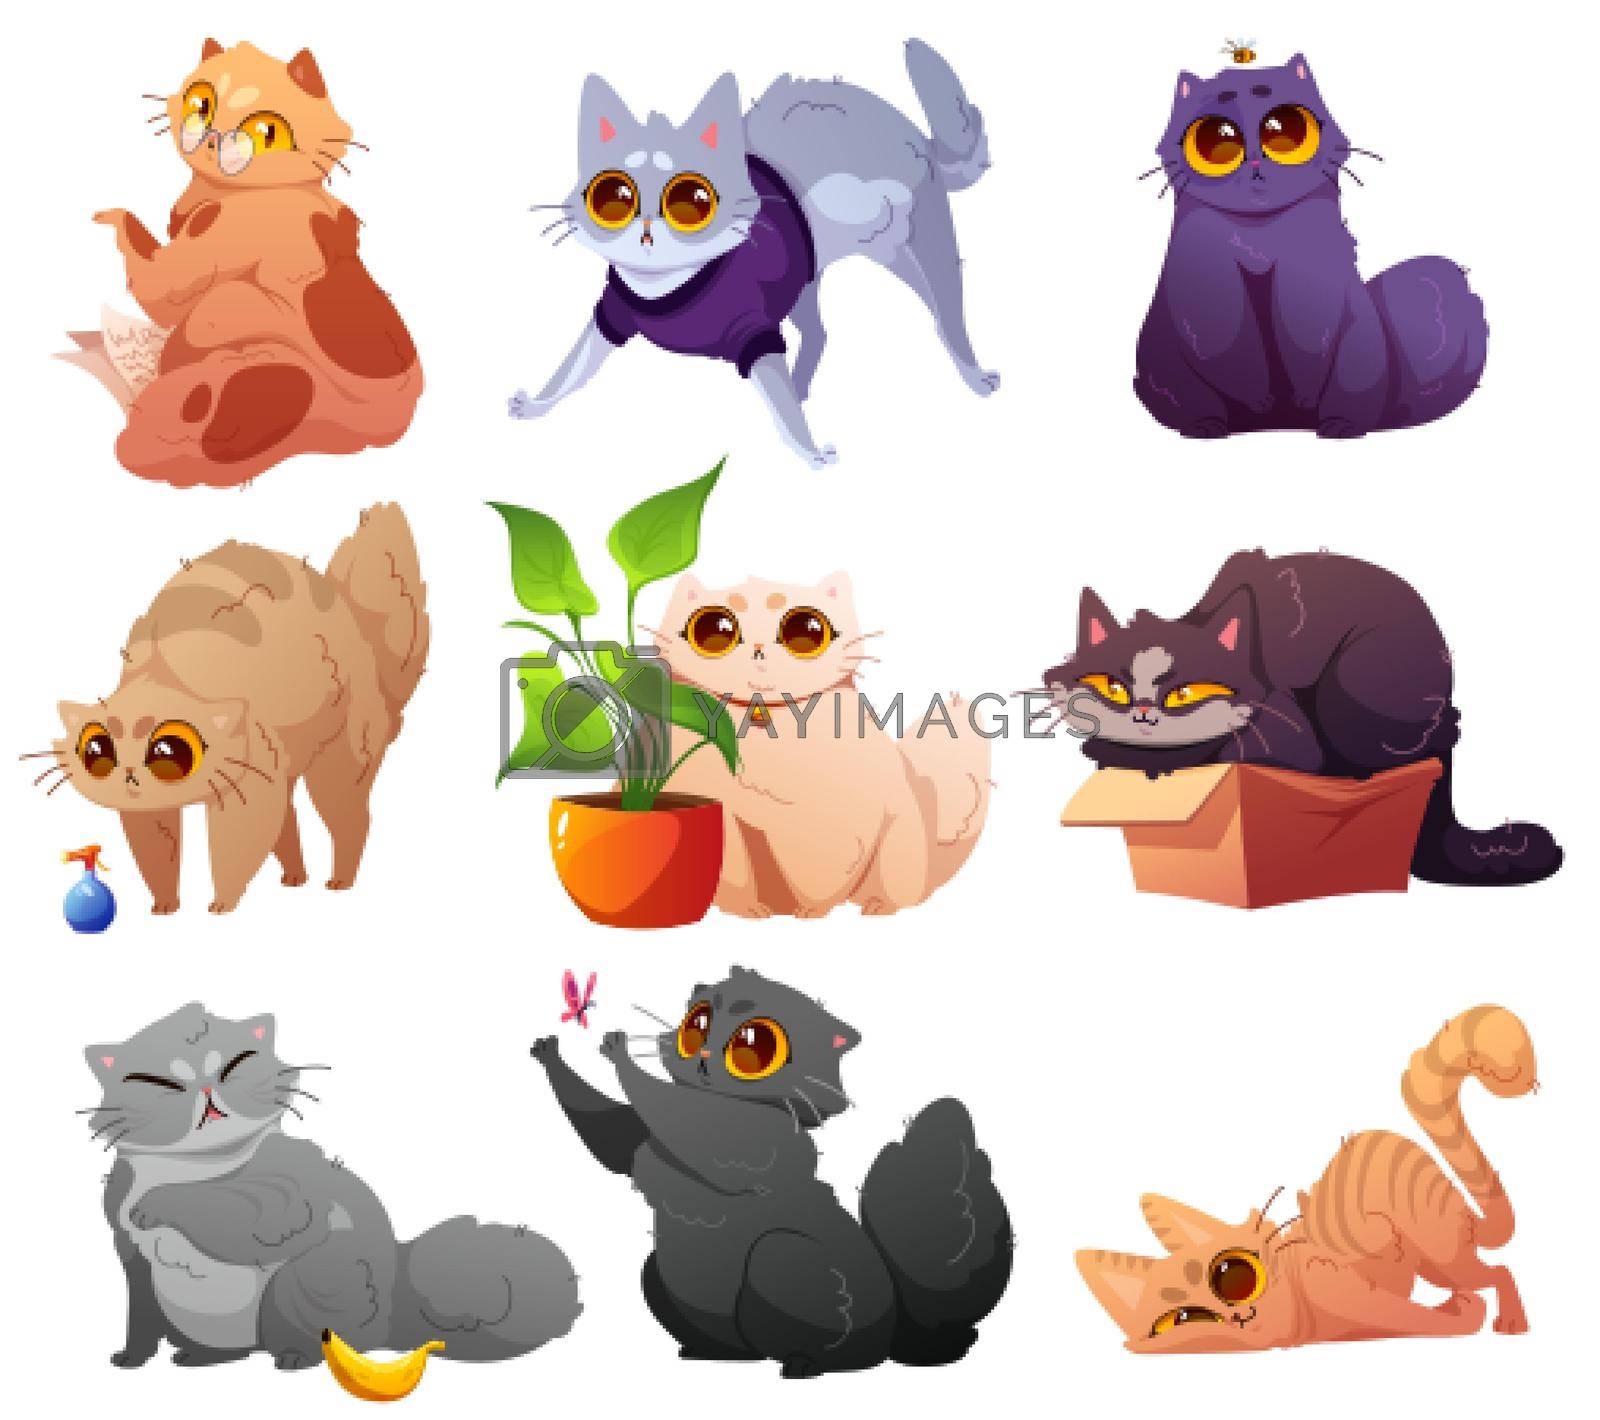 Cute pets characters, cats and kittens in different poses. Vector cartoon set of funny kitties reading, sitting in box, scared of banana and spray, hunting butterfly, with house plant